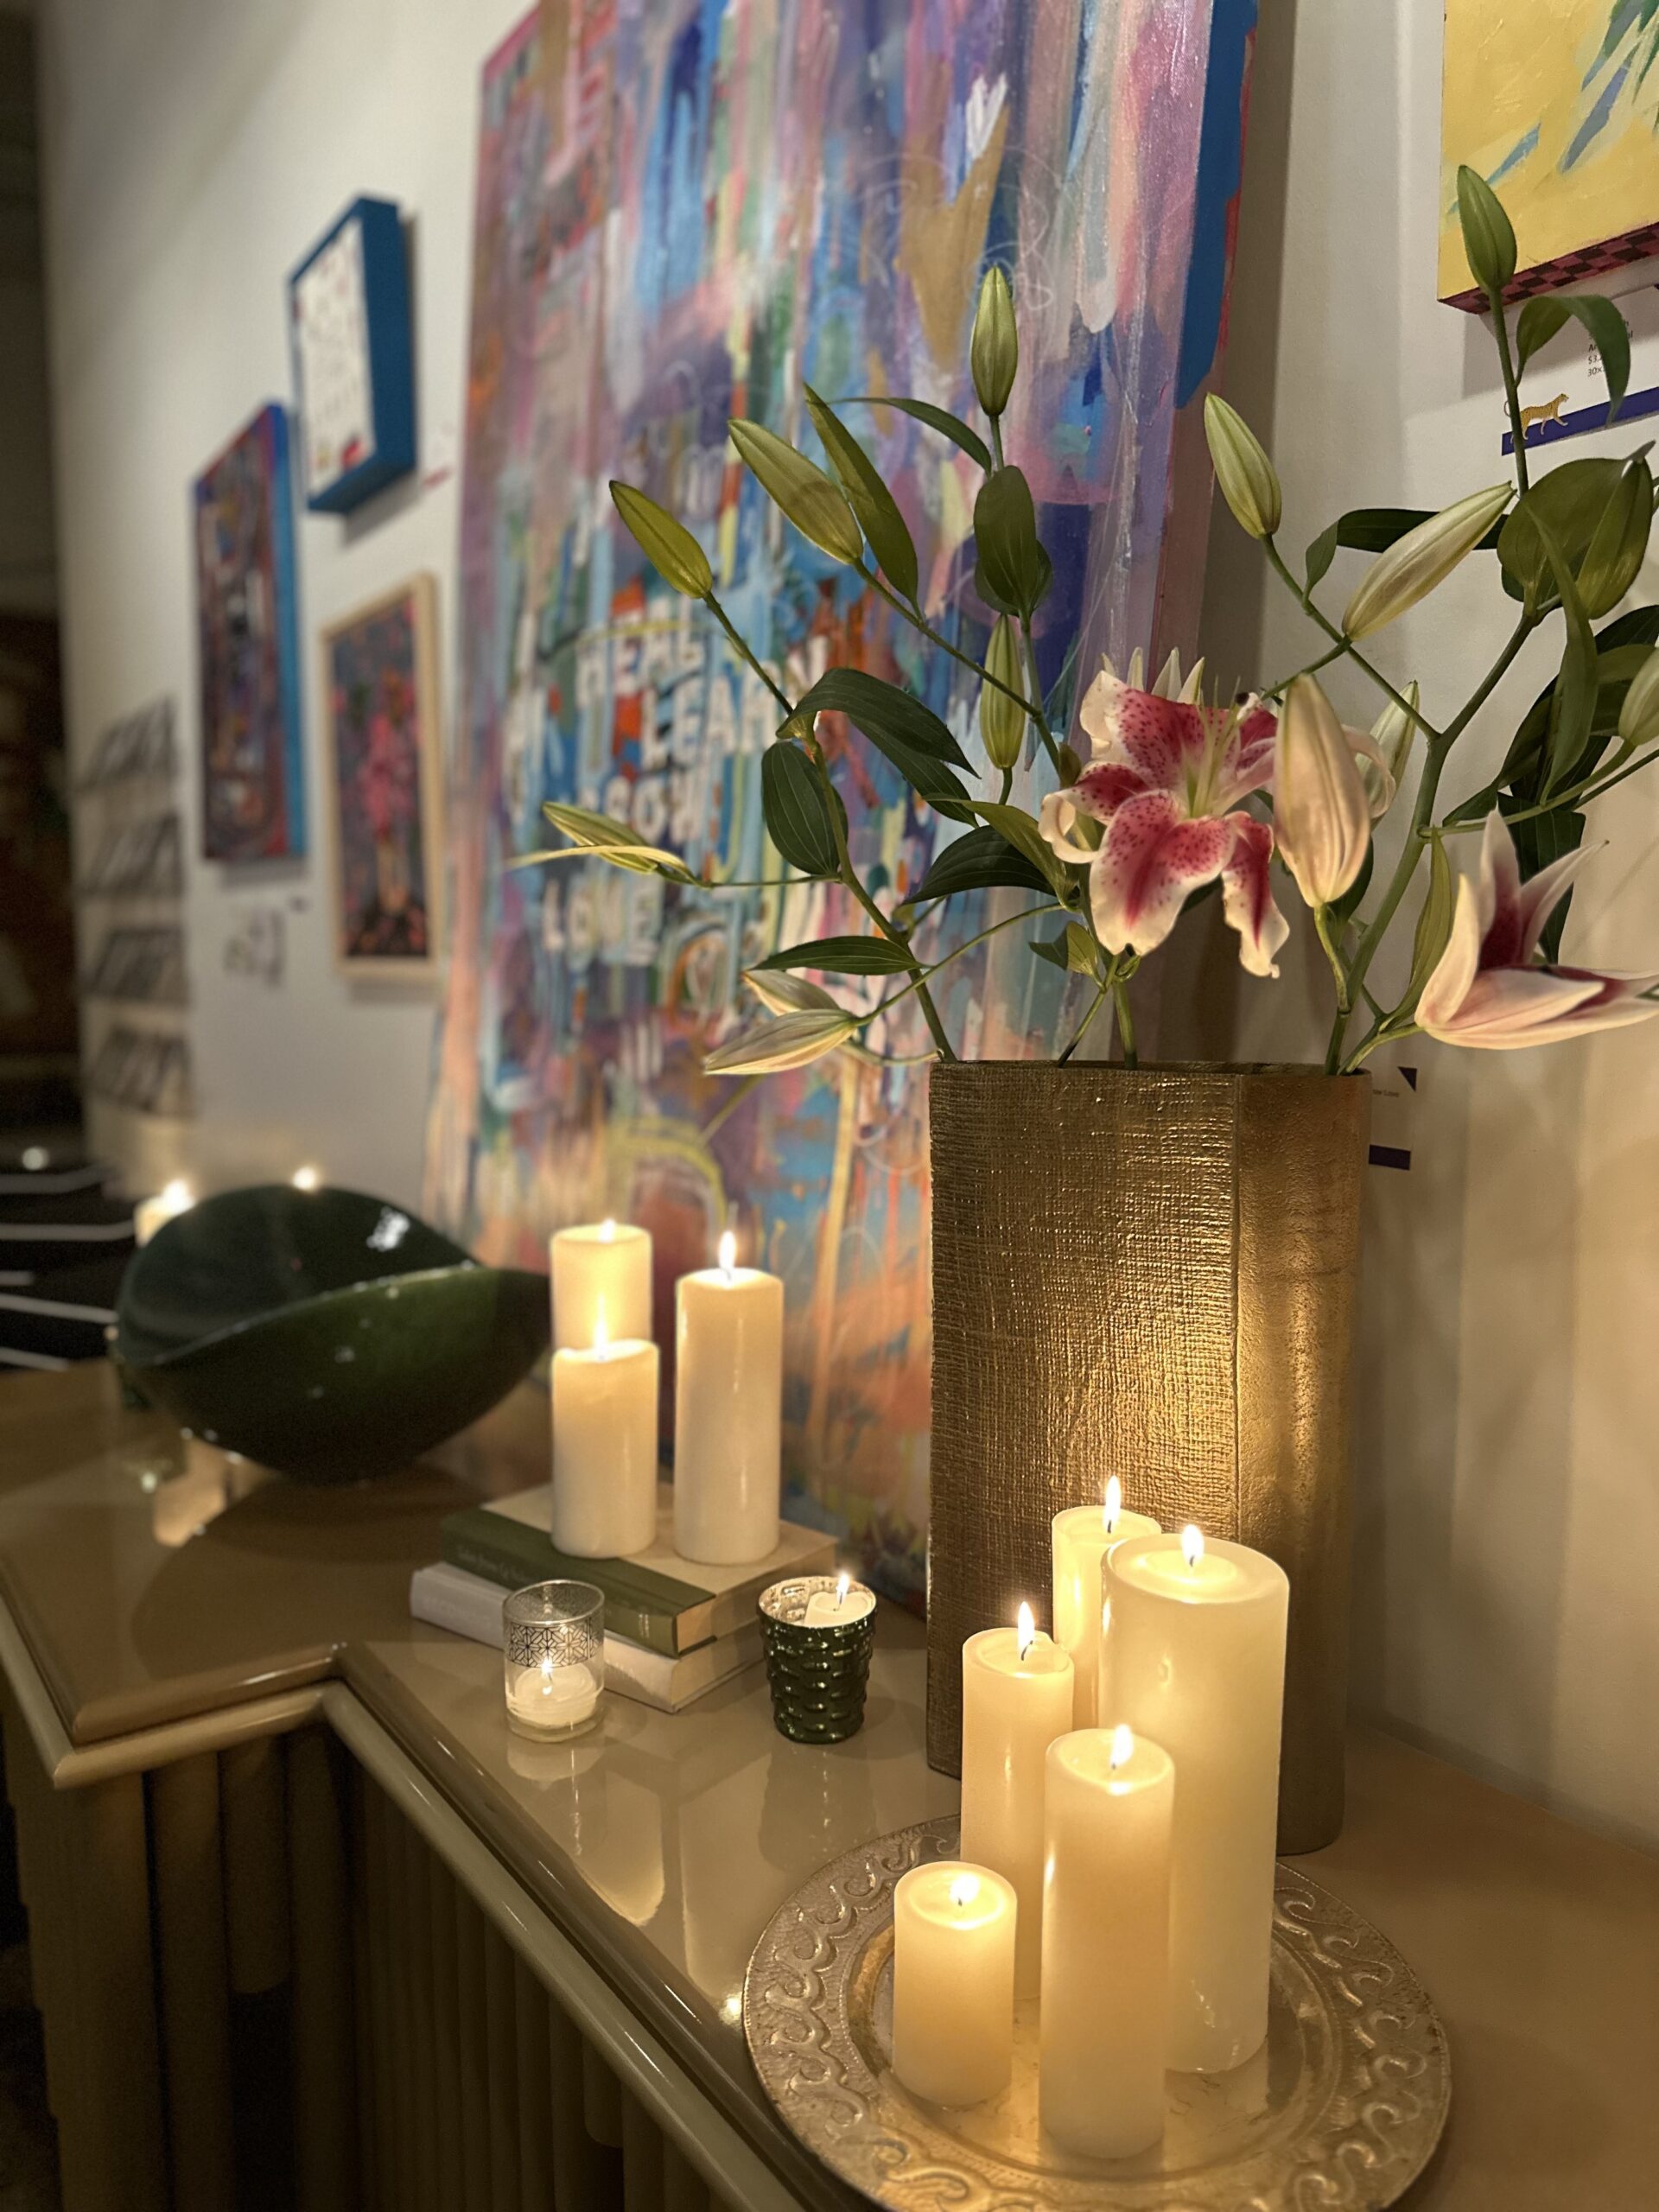 Candles dimly lit all over a table, lighting up a white and pink orchid as well as pastel and colorful artwork in background